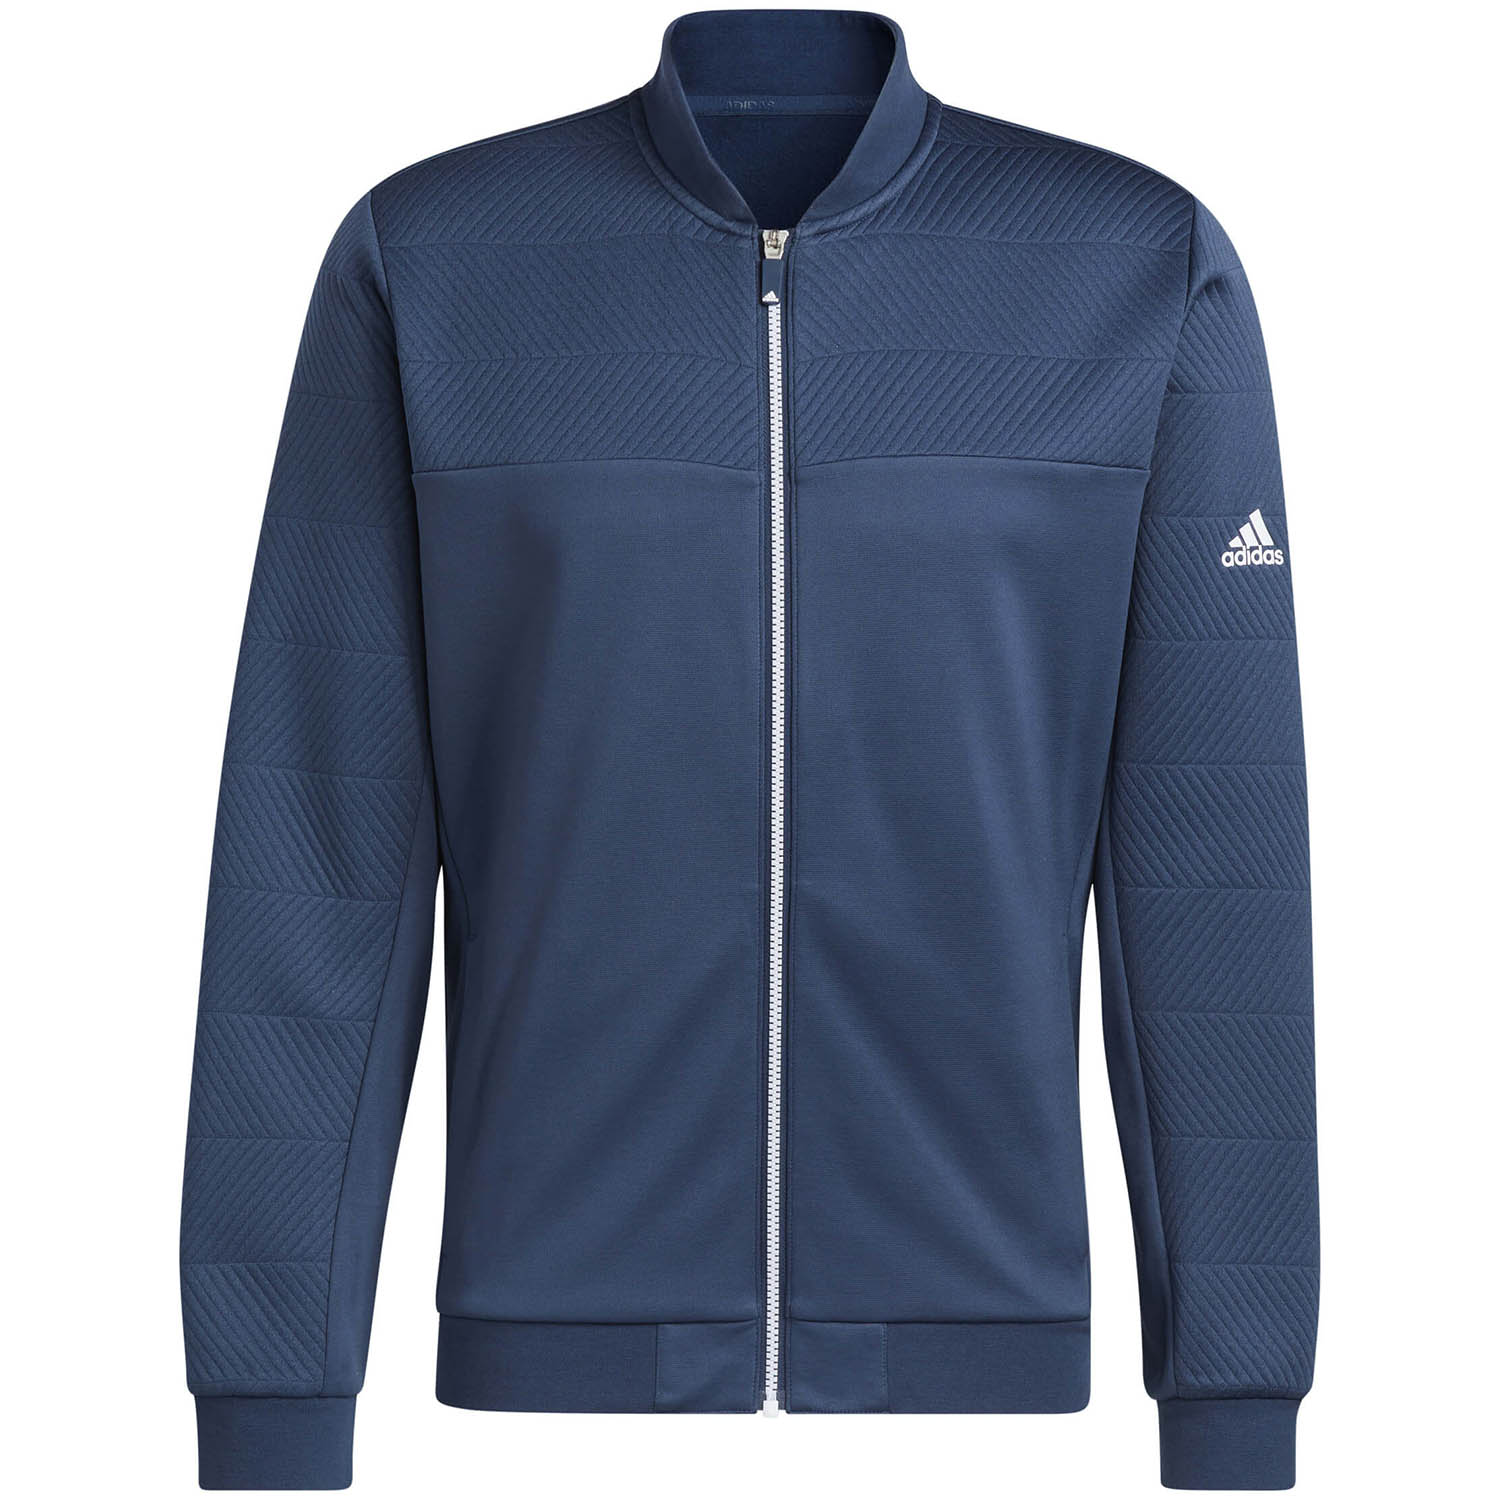 adidas COLD.RDY Full Zip Jacket